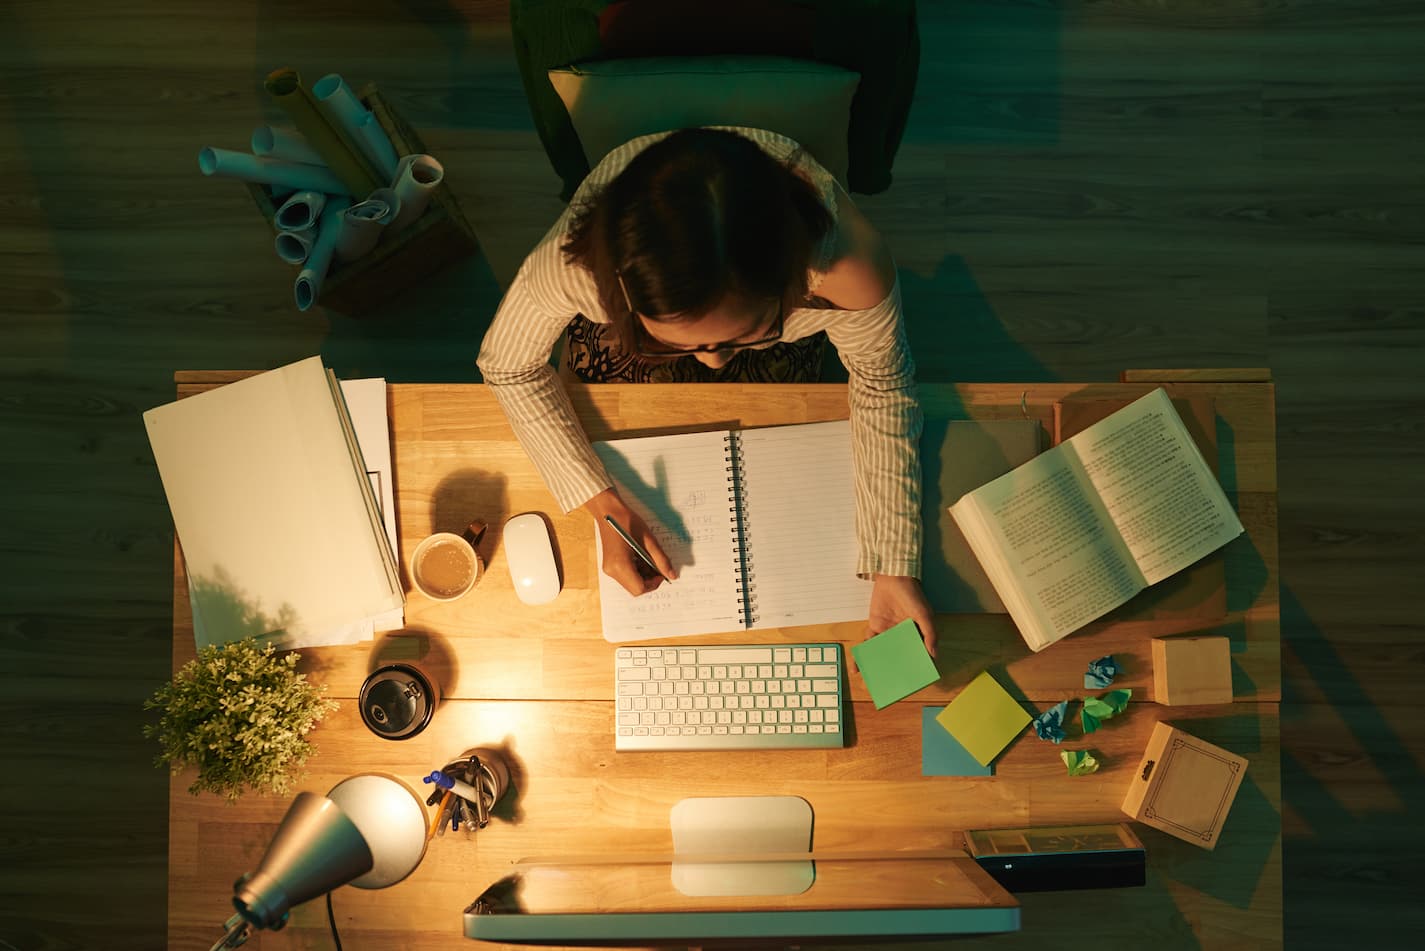 An image of a woman studying late at night